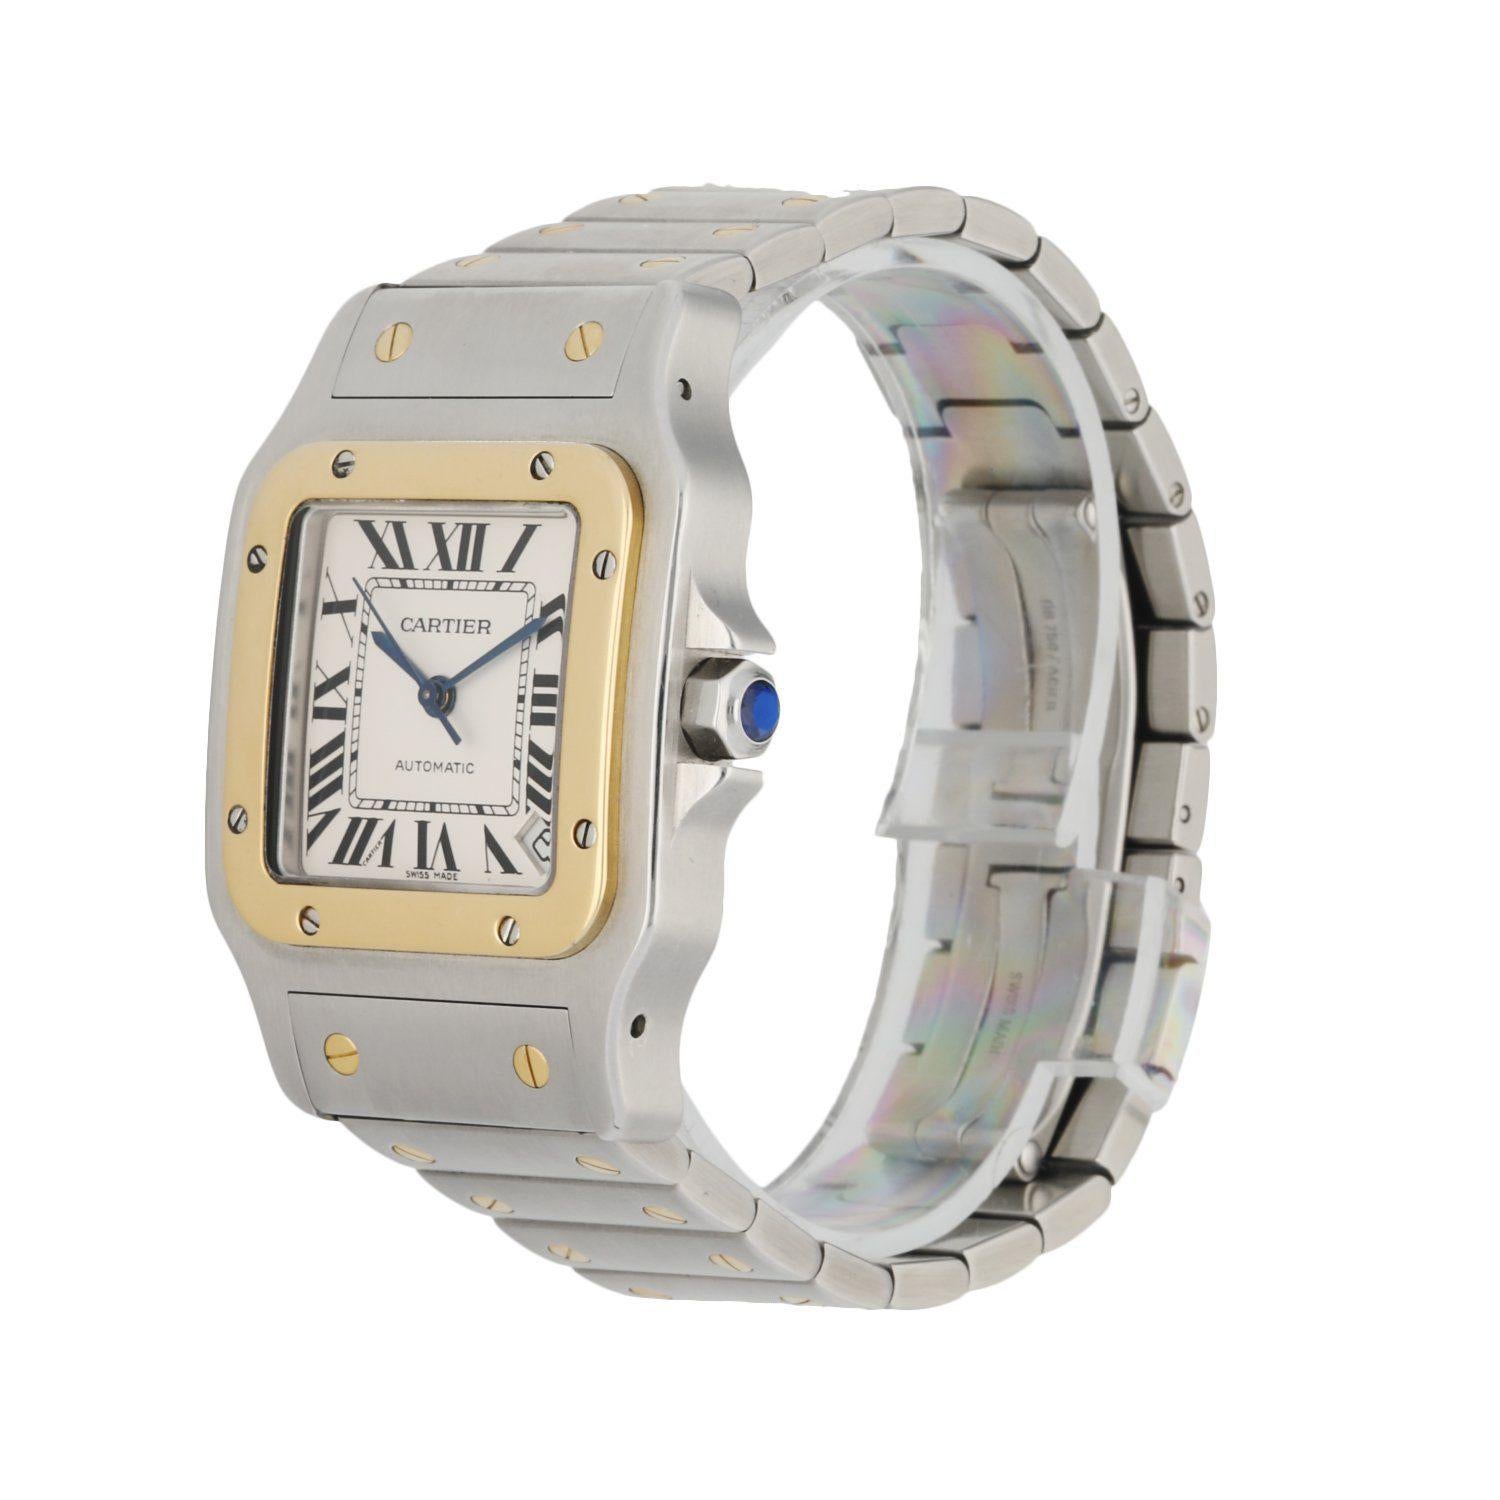 Cartier Santos Galbee 2823 men's watch. 32mm stainless steel case with 18k yellow gold bezel. White dial with blue hands and black Roman numeral markers. Date display between 4 & 5 o'clock. Stainless steel band with 18K yellow gold screws and a